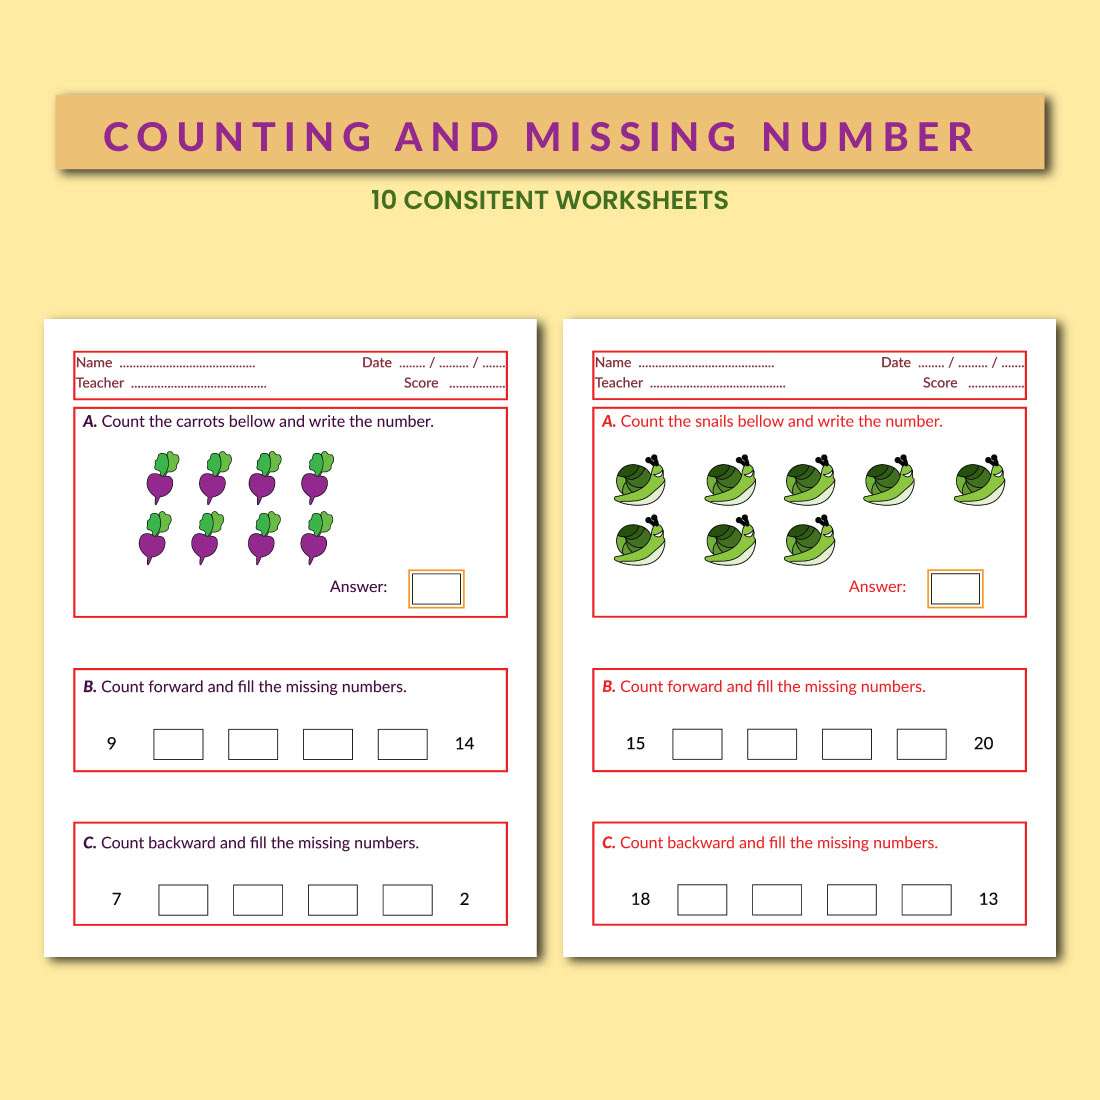 Counting And Missing Numbers Activity Pages cover image.